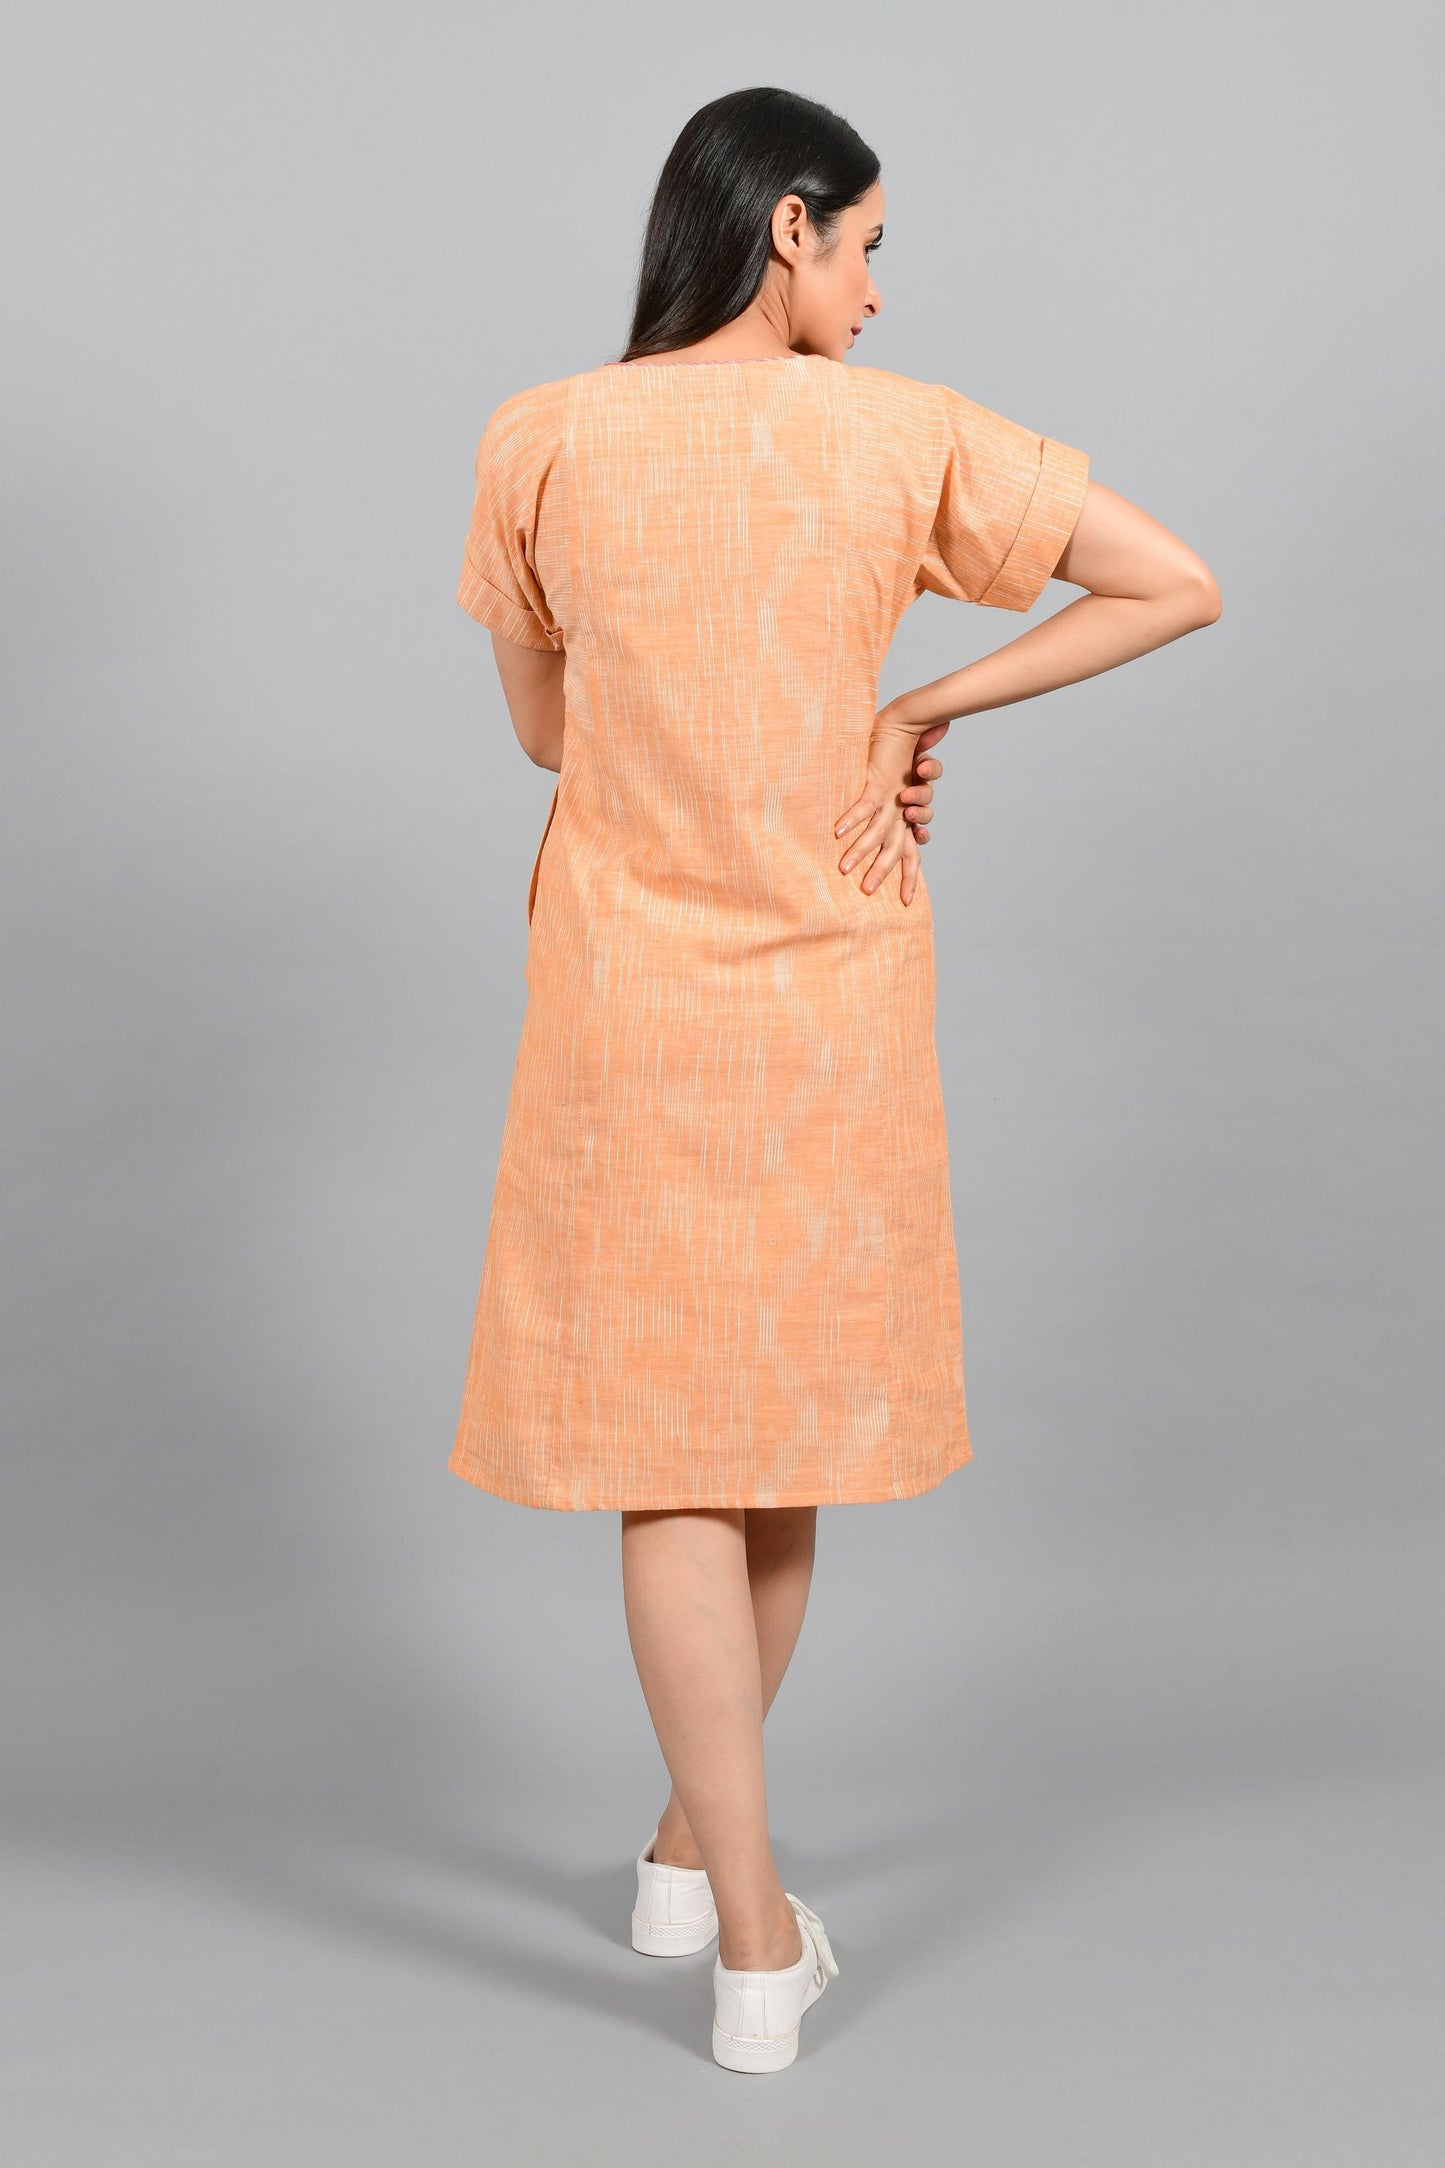 Back pose of an Indian female womenswear fashion model in an orange space dyed handspun and handwoven khadi cotton panelled dress by Cotton Rack.